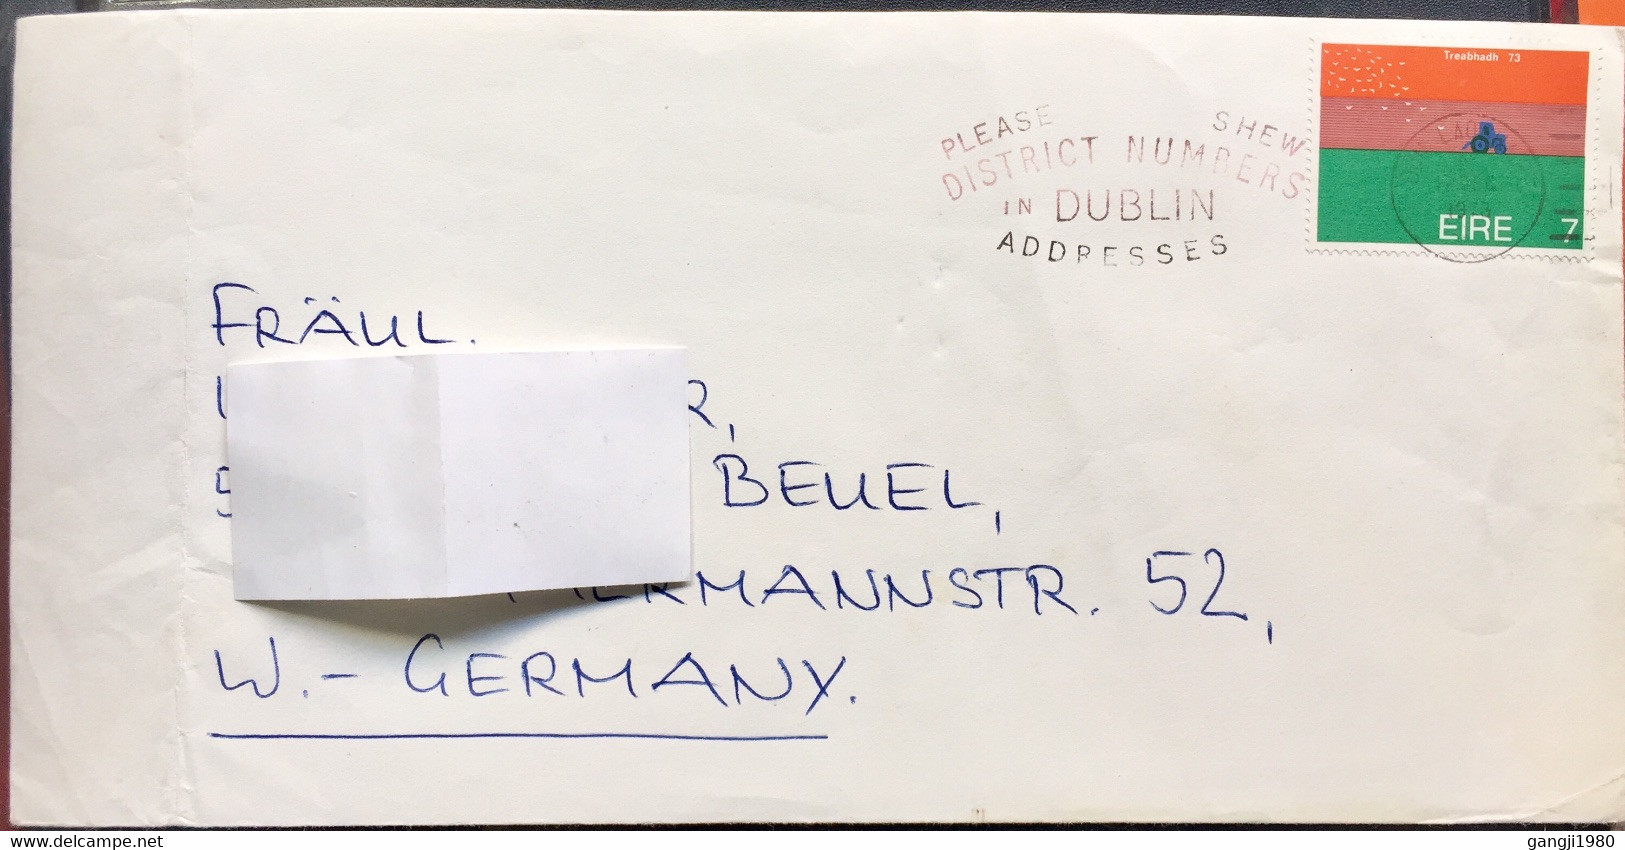 IRELAND 1973,POSTAL STATIONARY COVER, USED TO GERMANY, COLOUR SLOGAN, PLEASE SHEW DISTRICT NUMBER IN DUBLIN ADDRESSES - Interi Postali